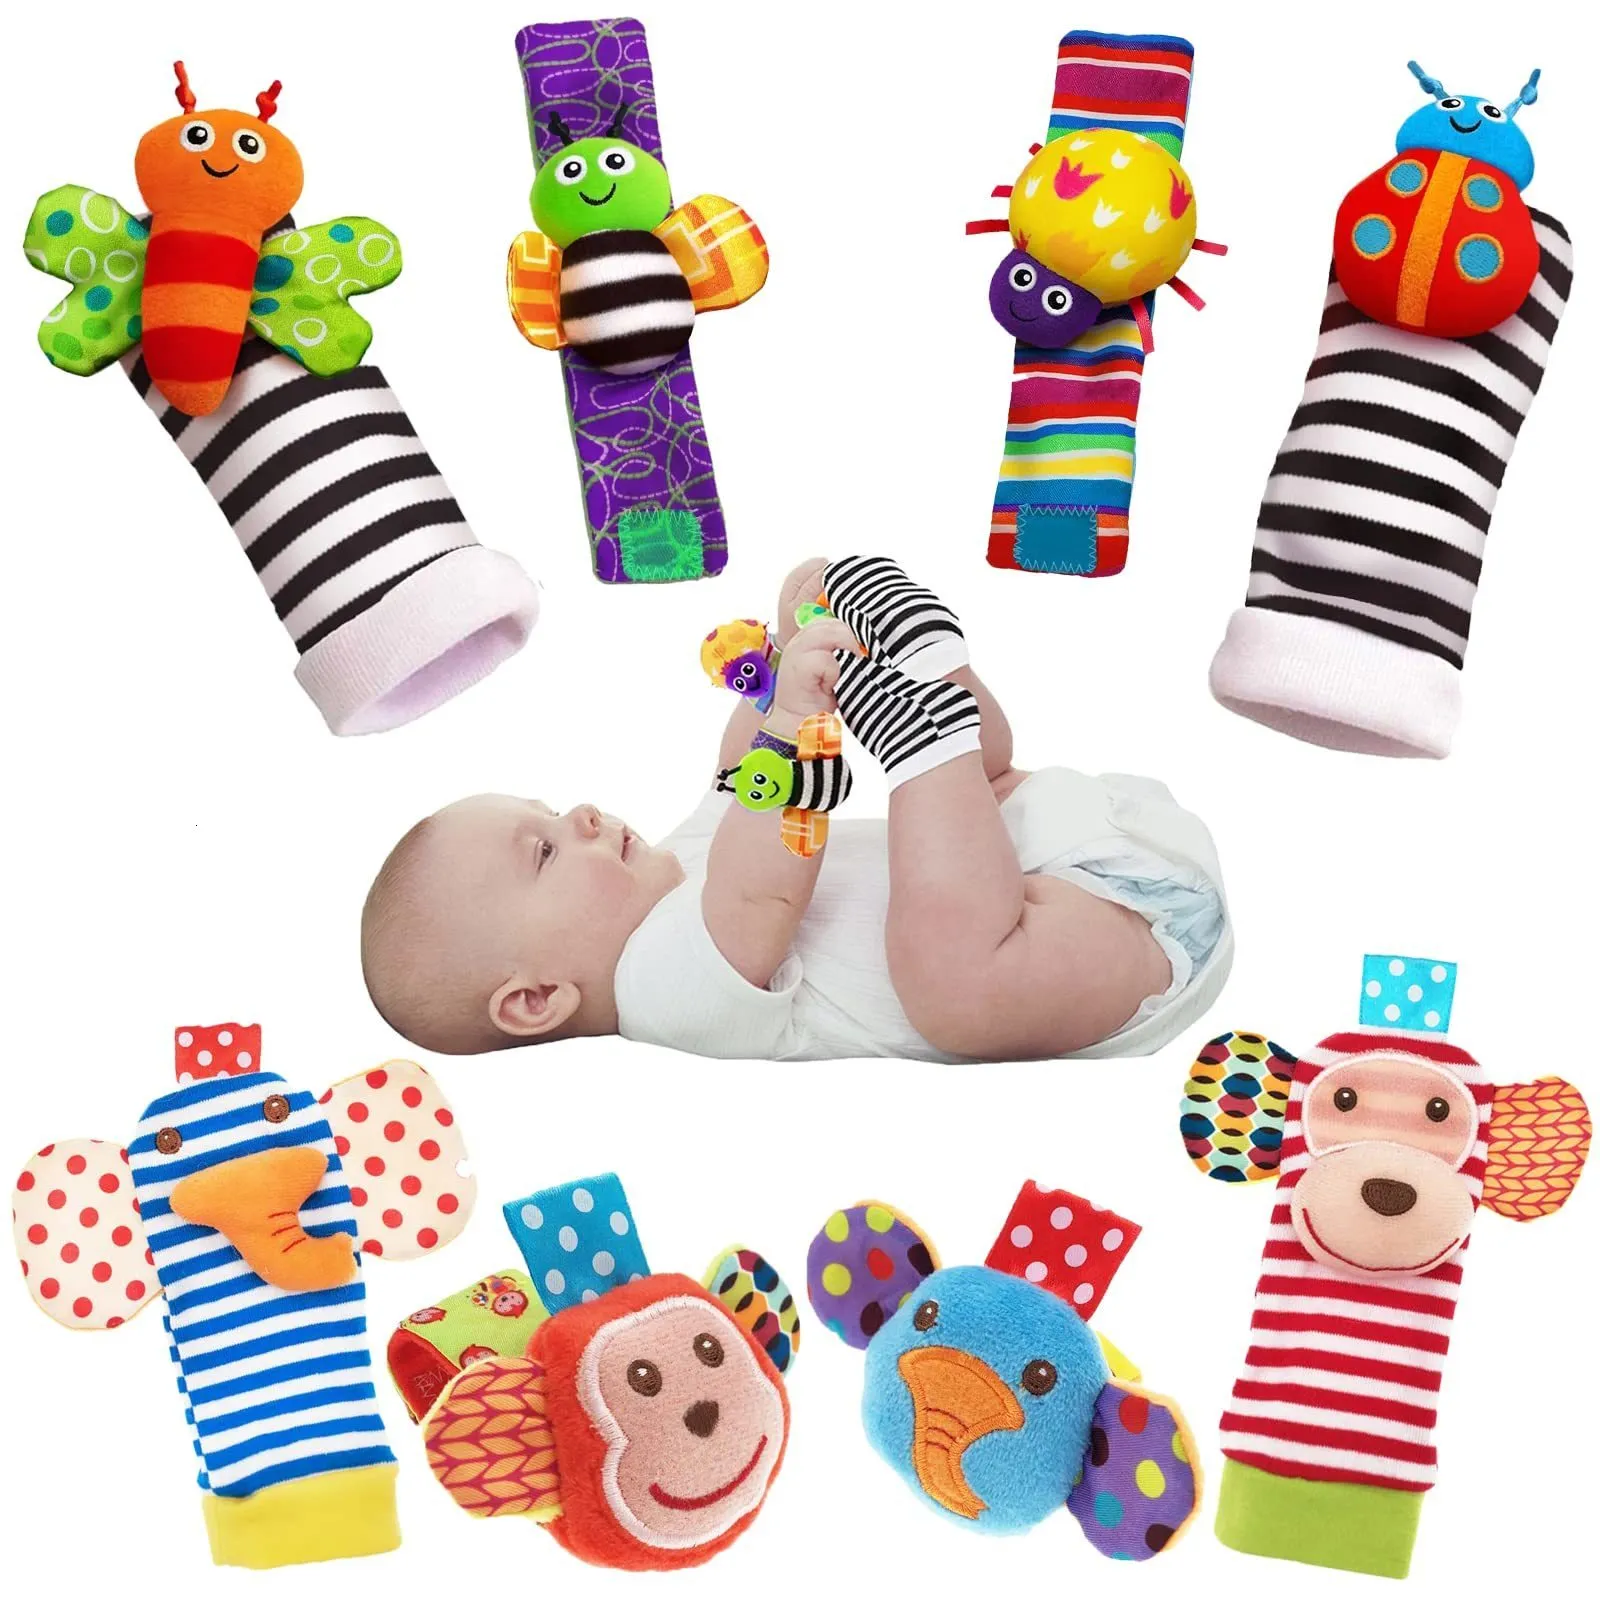 Rattles Mobiles 4PCSSET Baby Rattle Toys Cute Stuffed Animals Wrist Foot Finder Socks 012 Months For Infant Boy Girl born Gift 230518